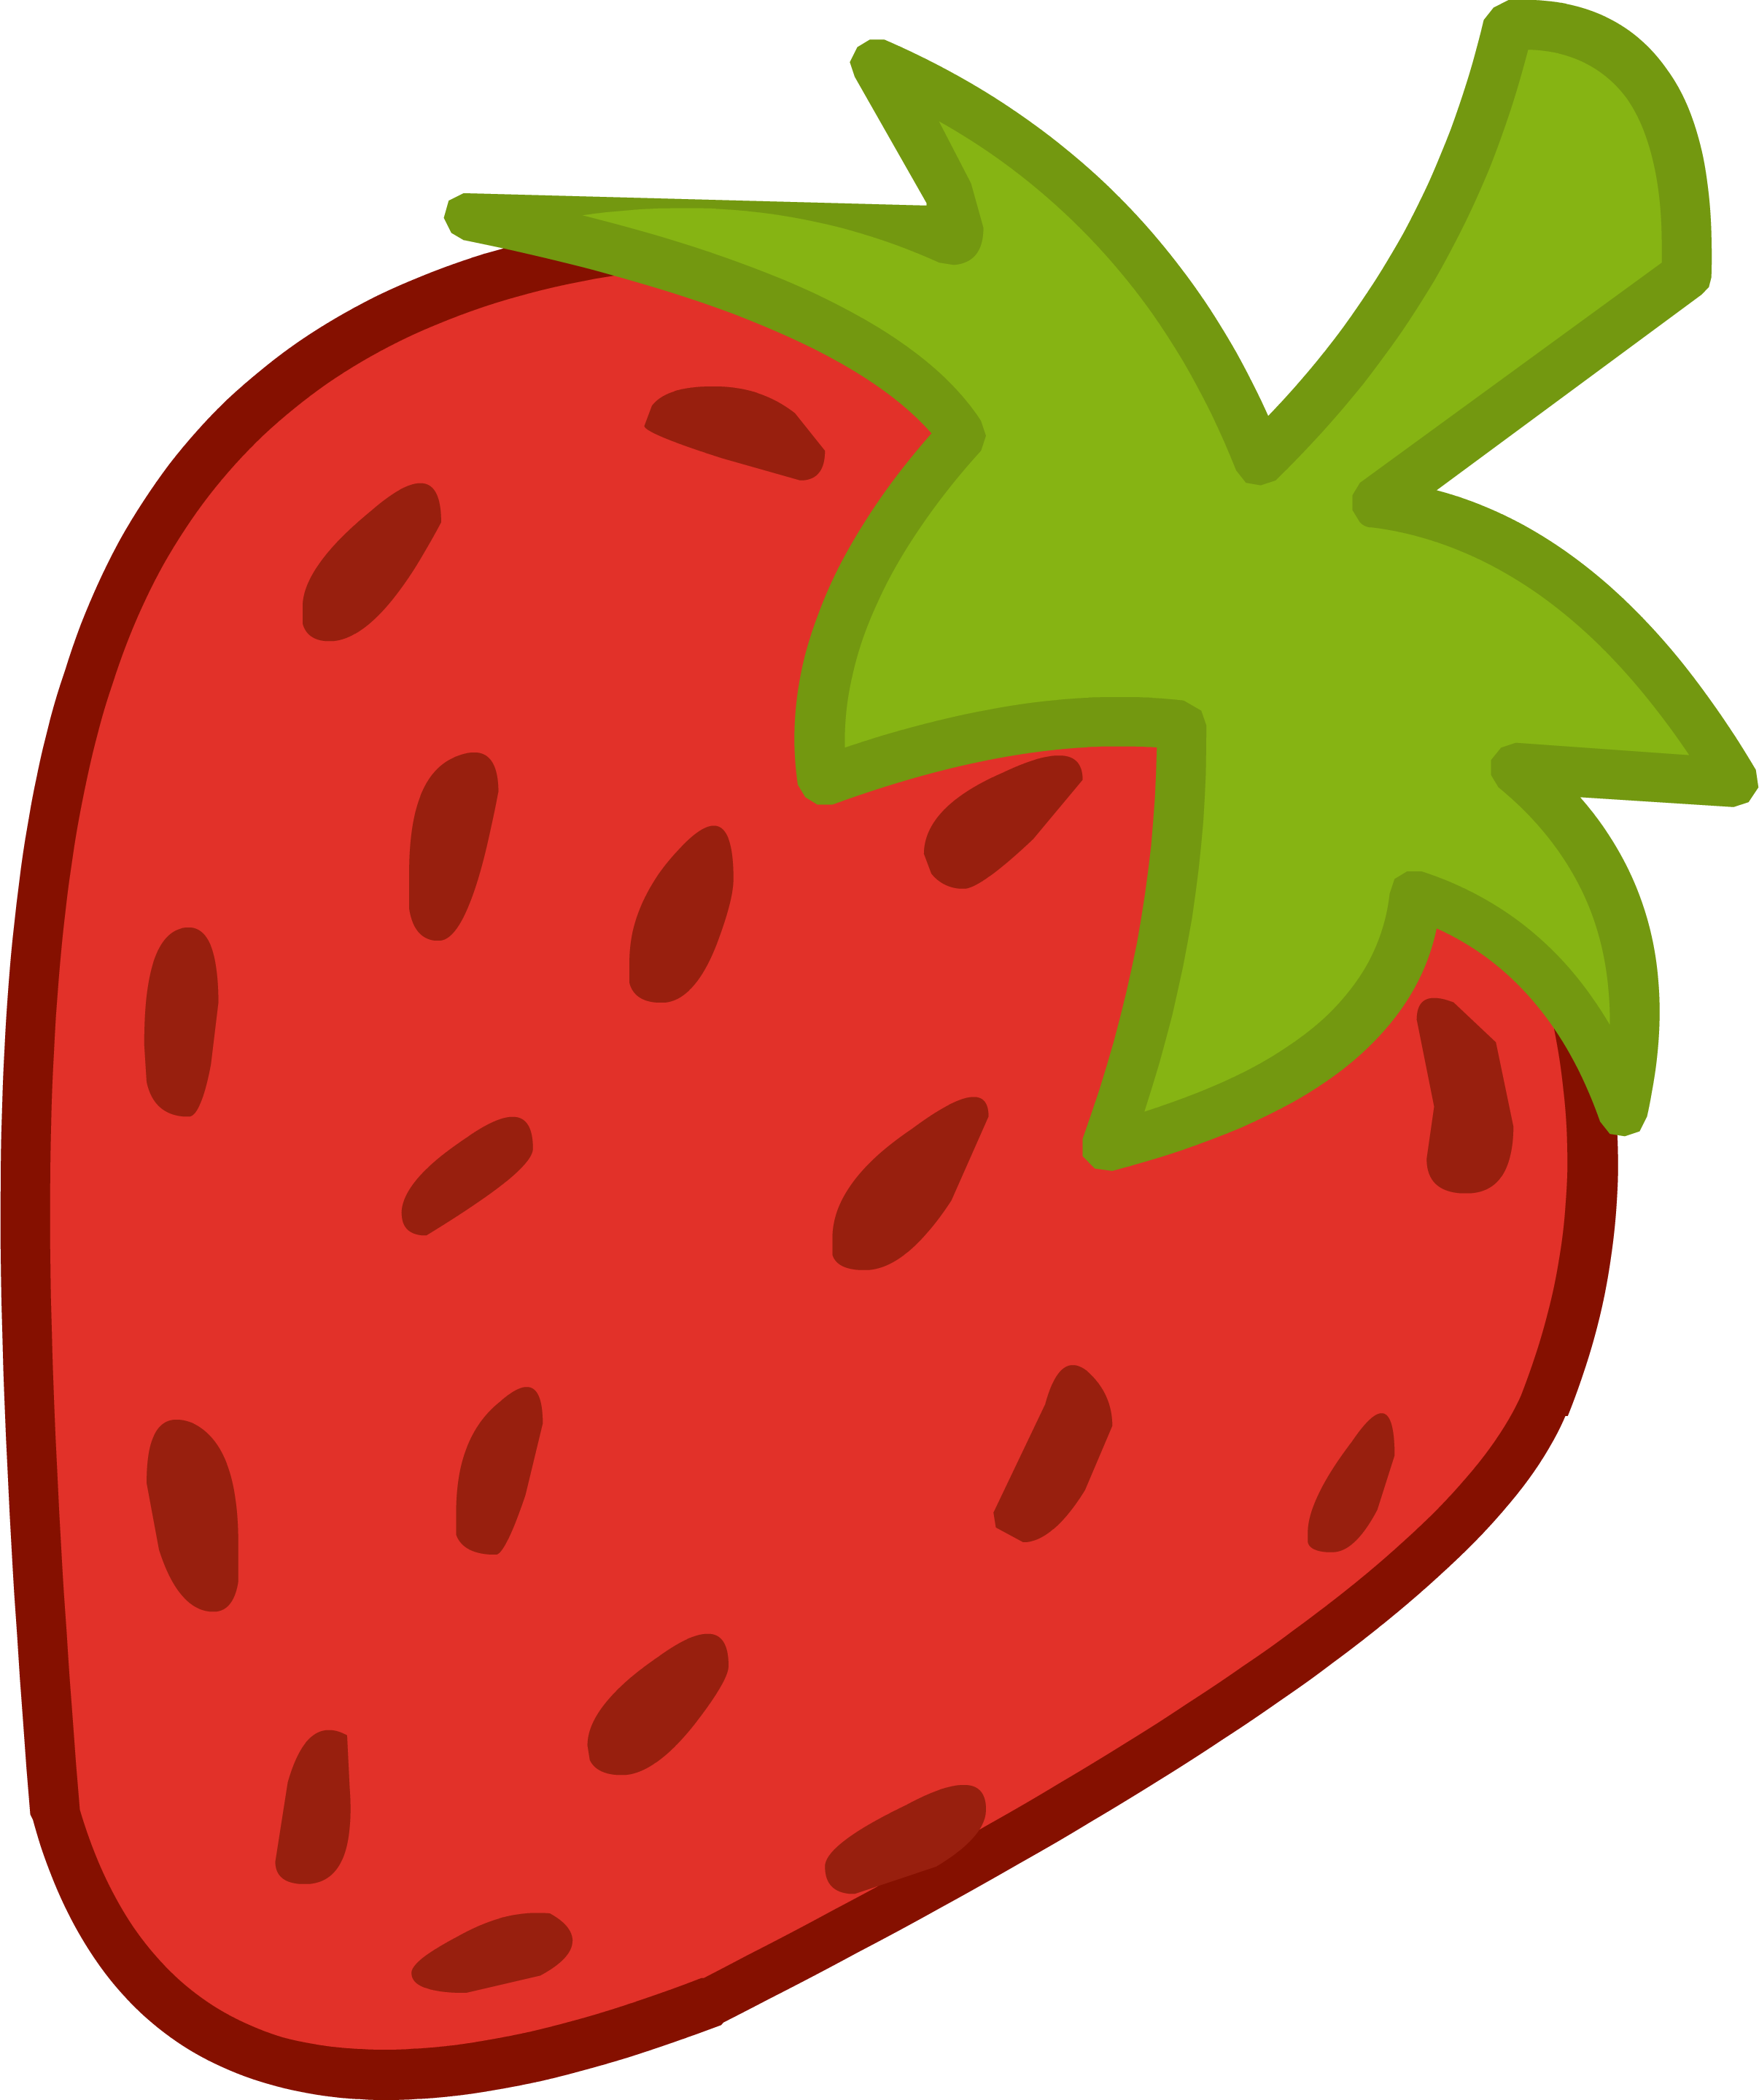 clipart of strawberry - photo #31